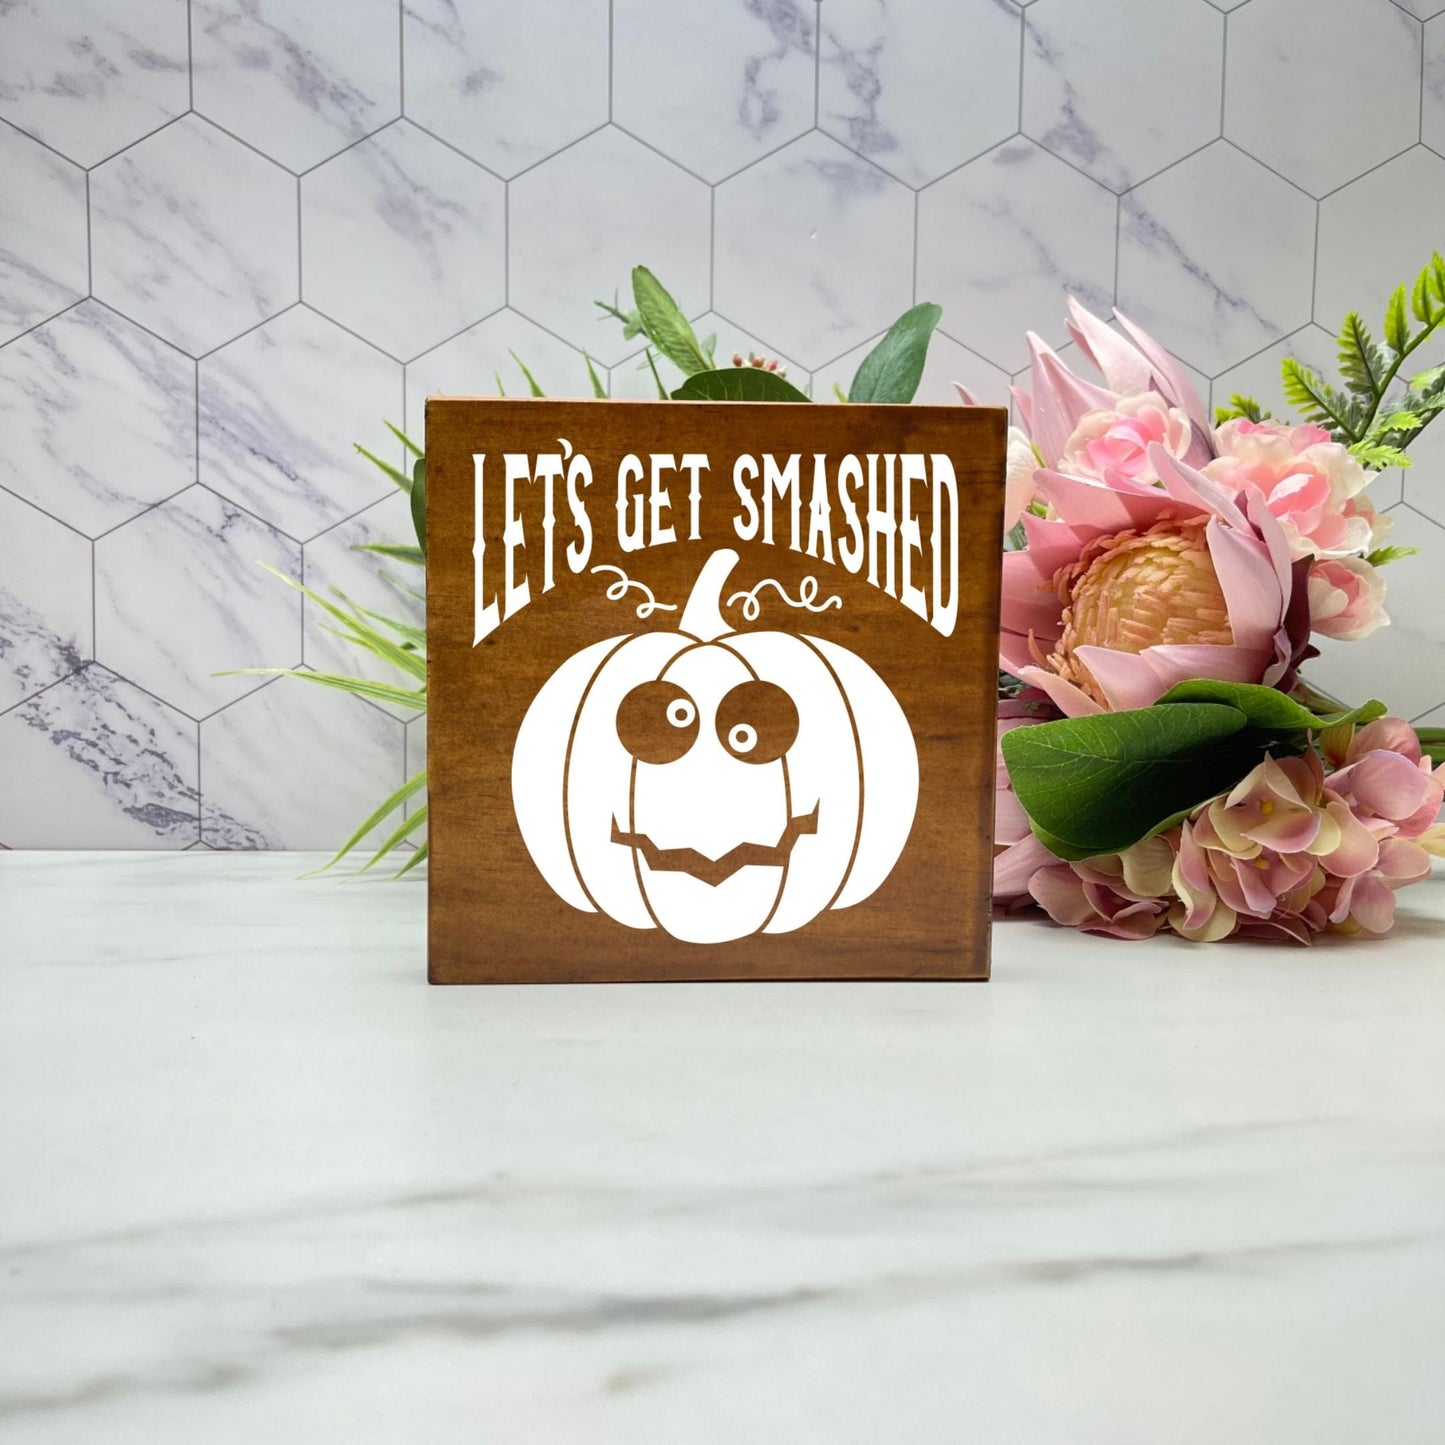 Let's get smashed Wood Sign, Halloween Wood Sign, Halloween Home Decor, Spooky Decor